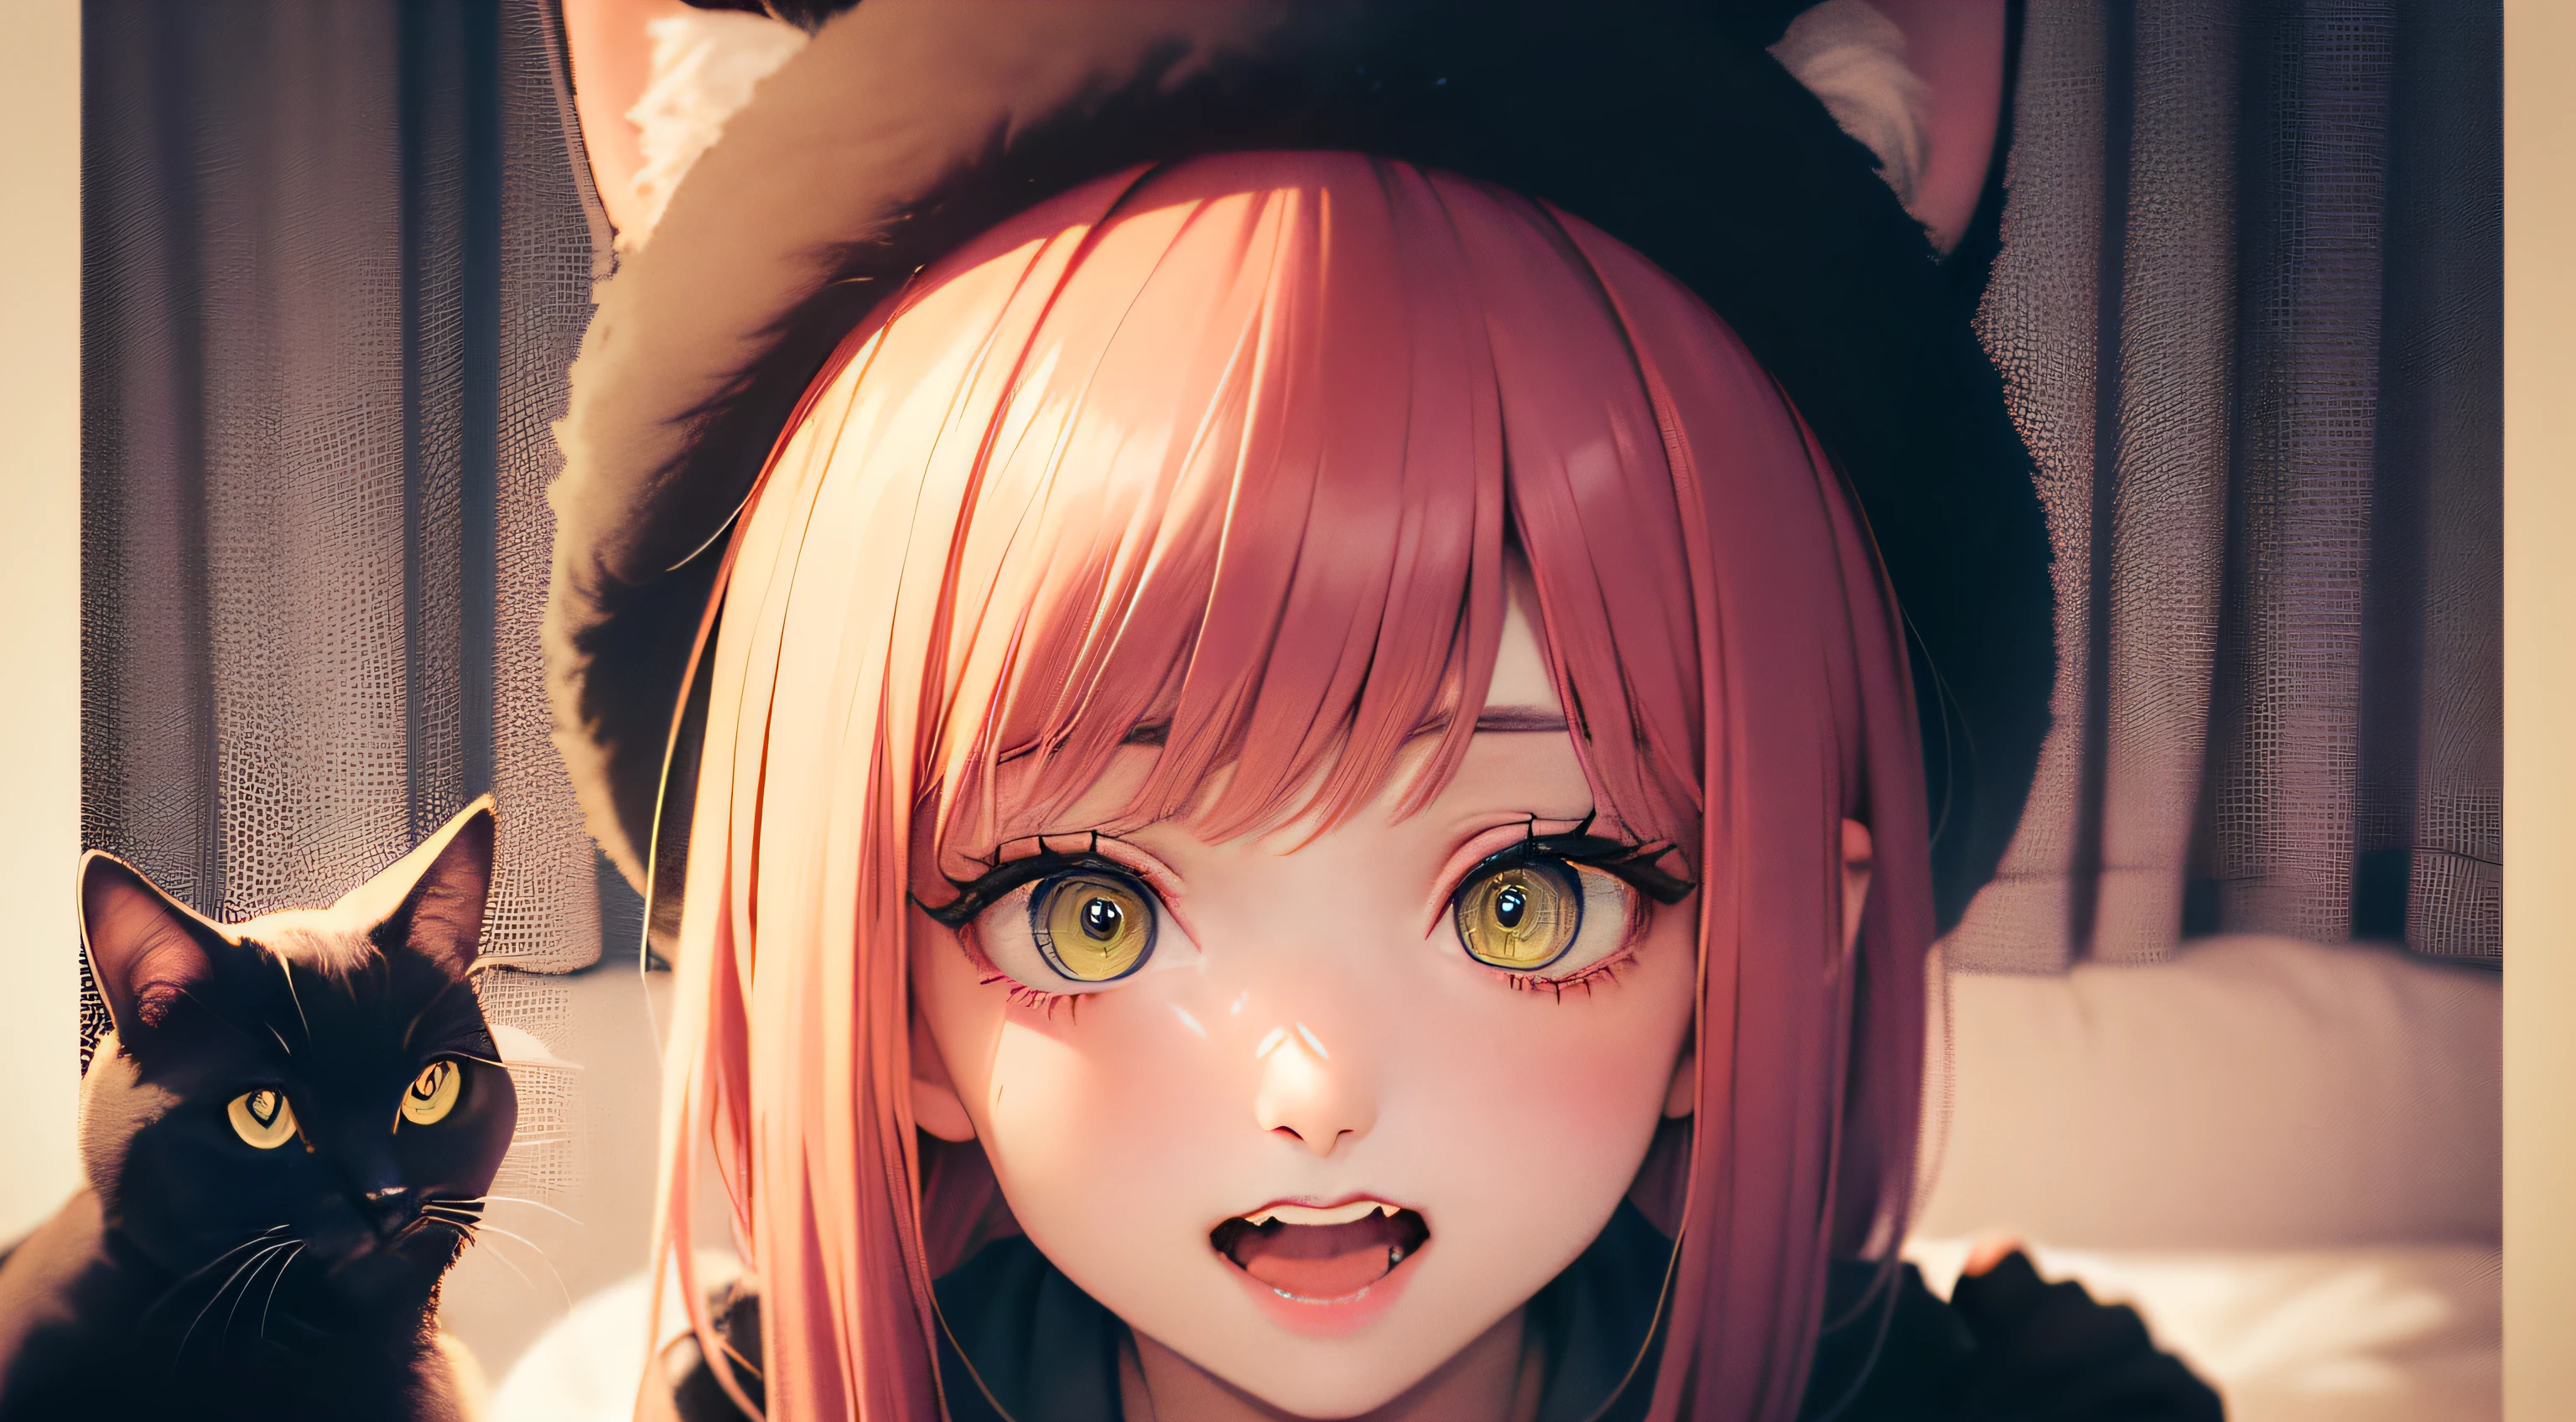 An anime girl with pink hair an디 green eyes with a surprise디 expression on her face an디 a black cat hat, (여자 1명:0.992), (:디:0.583), (앞머리:0.701), (붉히다:0.584), (녹색 눈: 0.992), (Looking at the Au디ience: 0.711), (입을 벌리다: 0.760), (분홍색 머리: 0.917), (리본: 0.826), (짧은 머리: 0.571), (웃다: 0.855), (홀로: 0.949), (이: 0.770), (Upper Bo디y: 0.760)